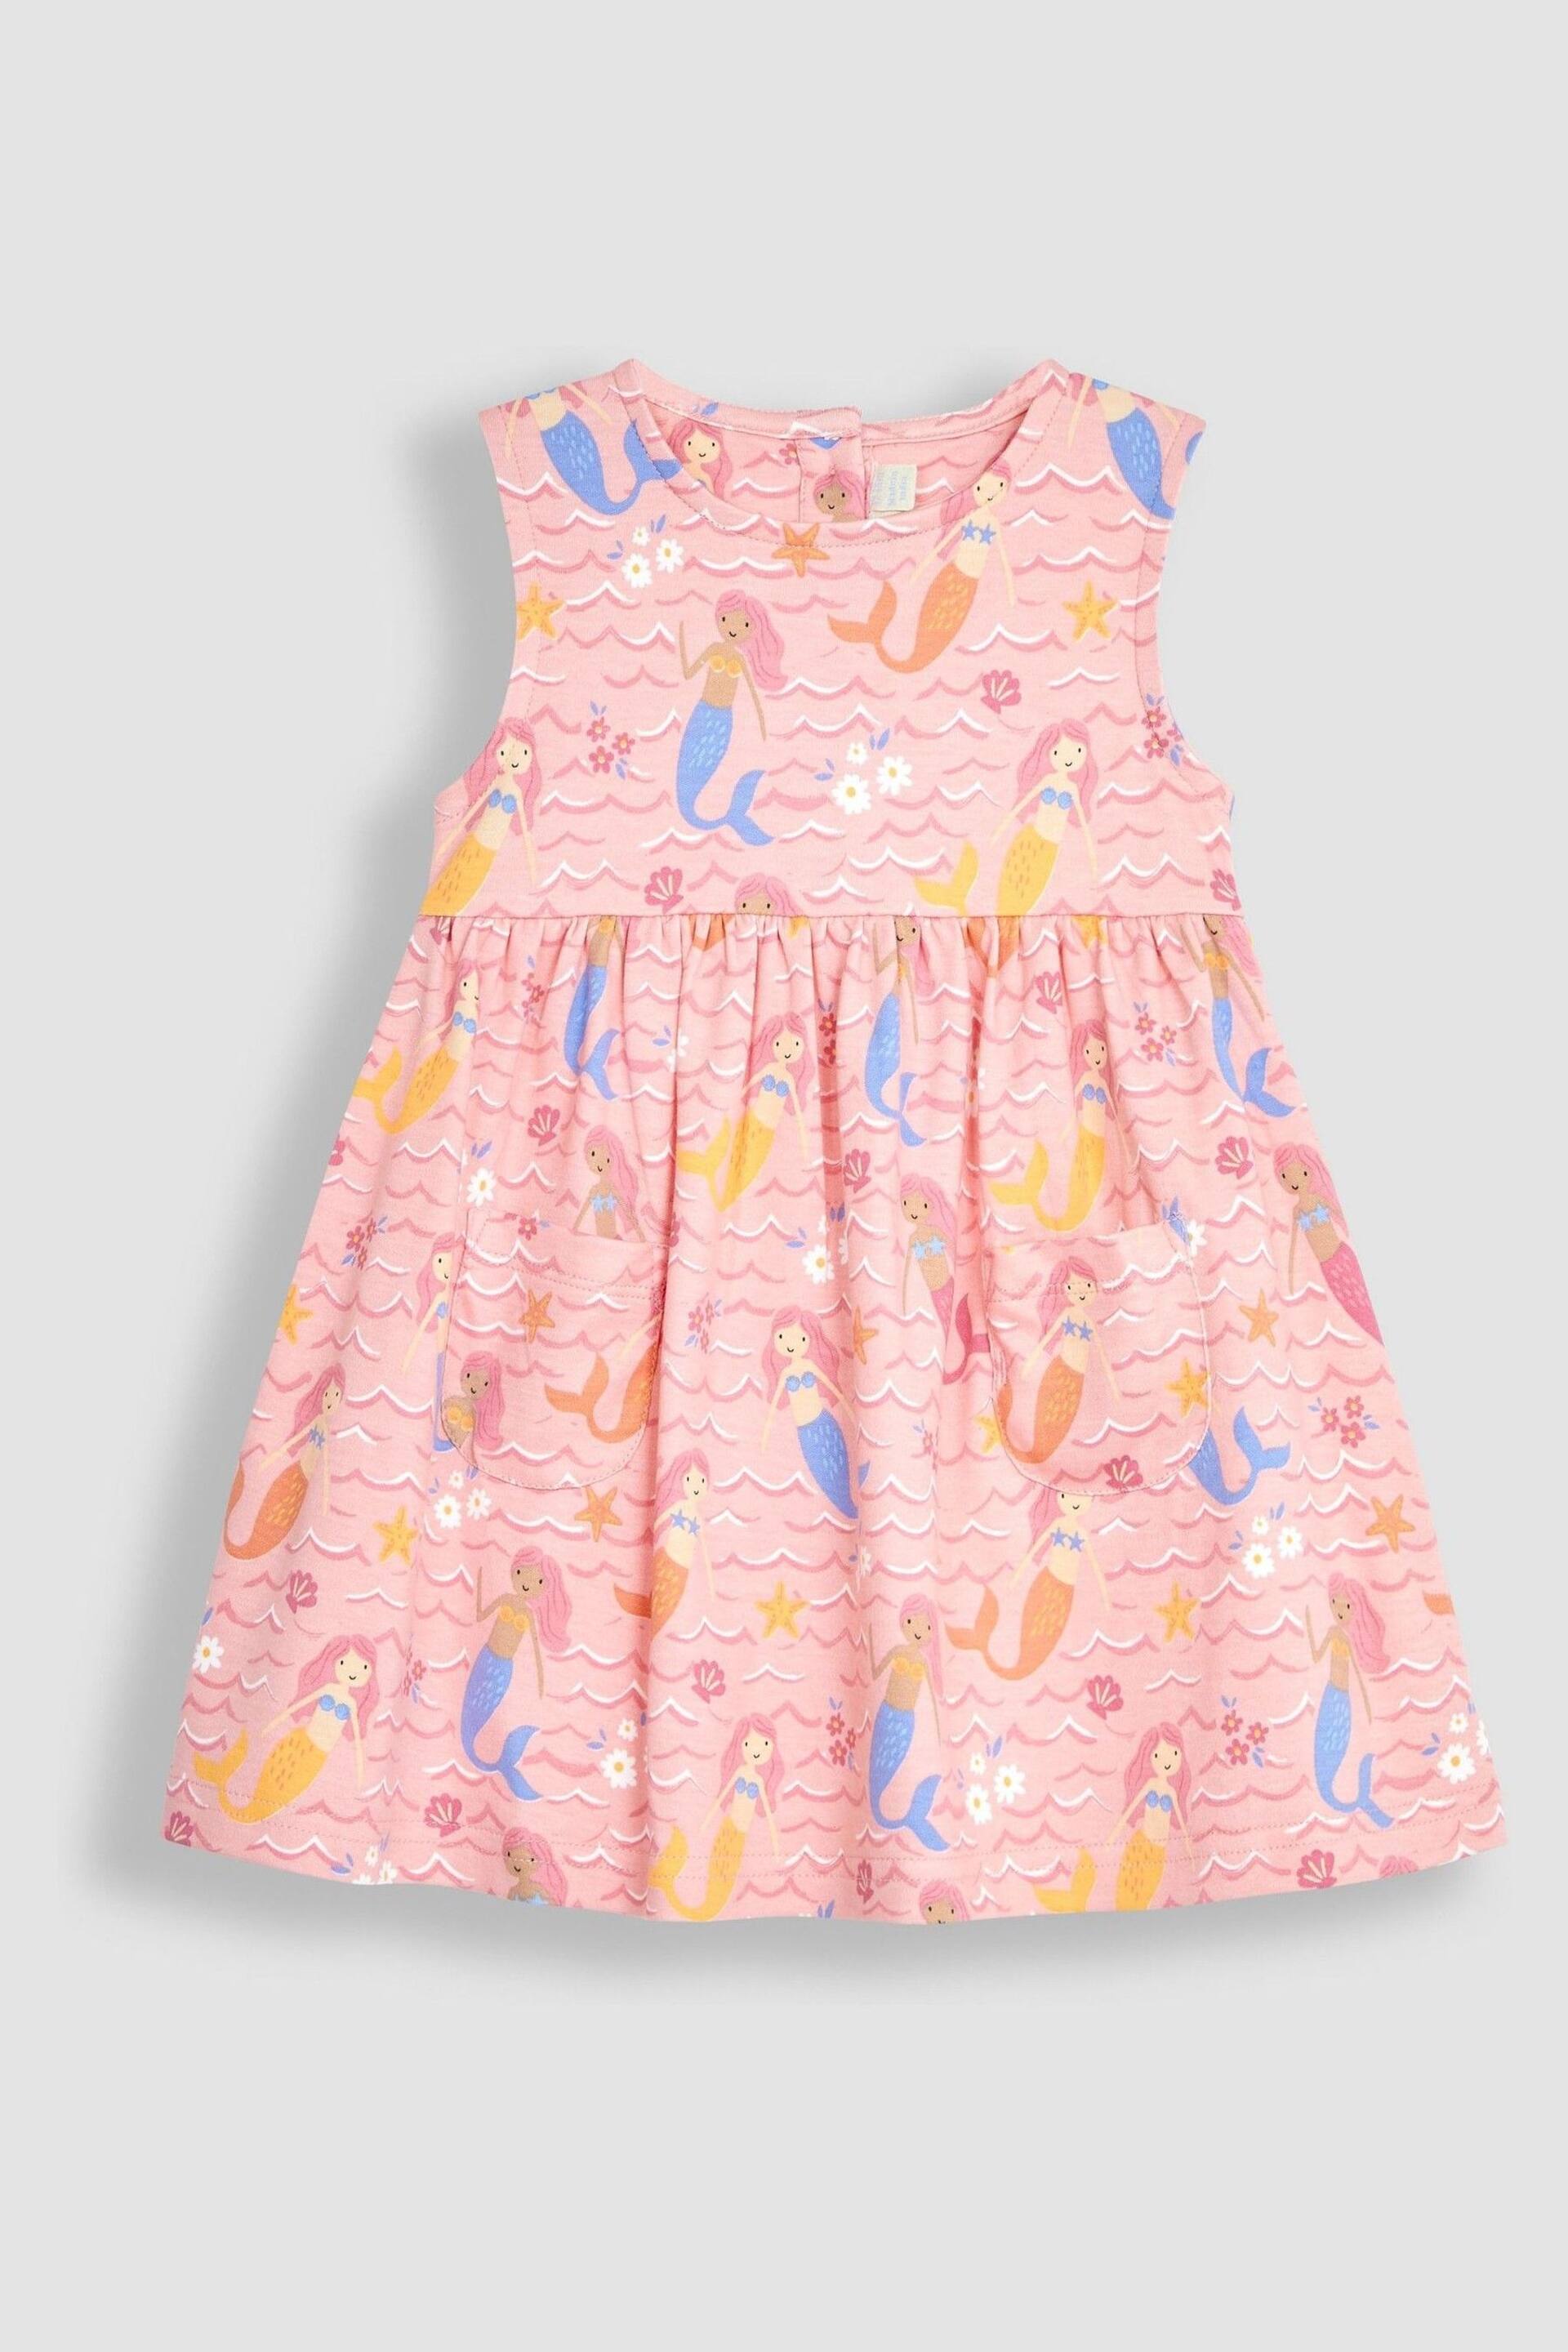 JoJo Maman Bébé Pale Pink Mermaid With Pet In Pocket Tiered Dress - Image 1 of 3